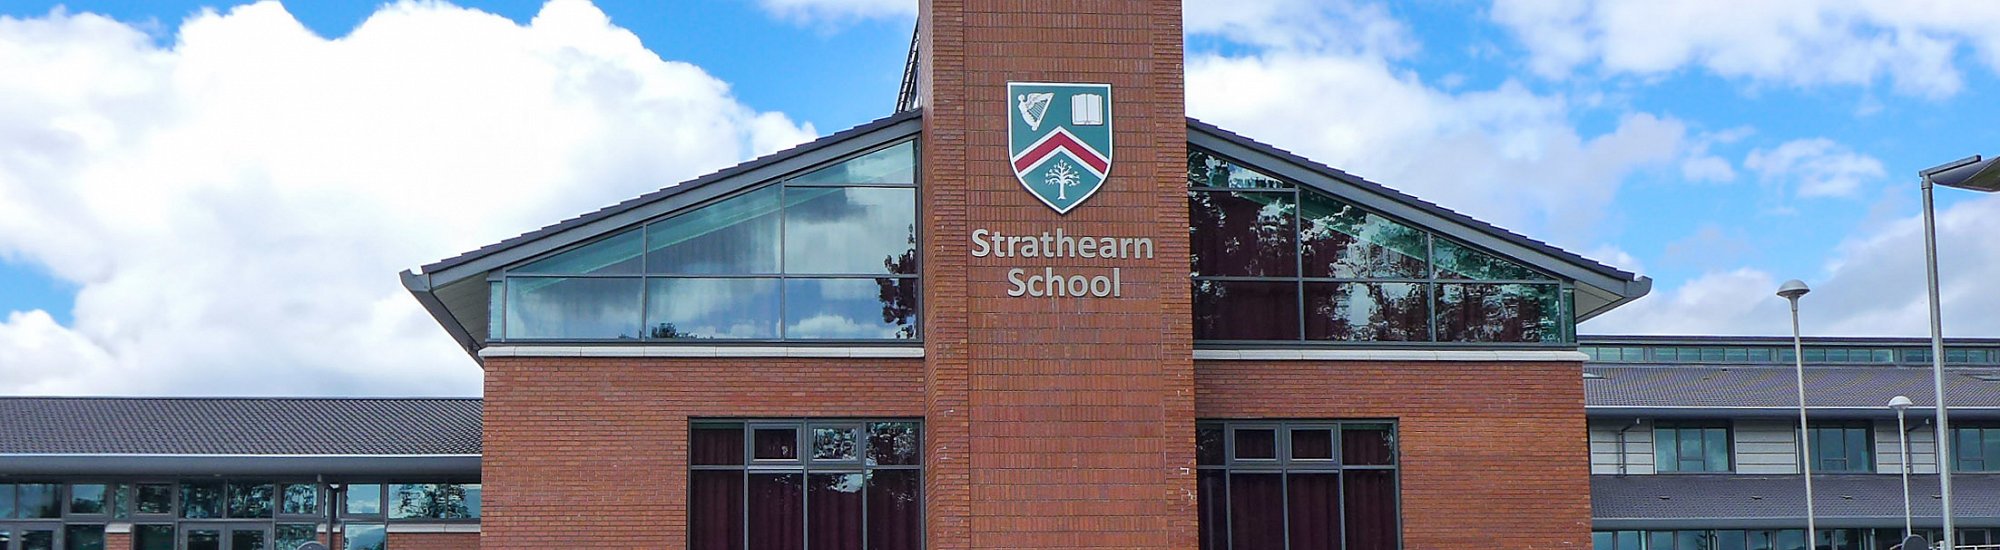 School Closure Strathearn School will be closed on Monday 16 October due to adverse weather conditions